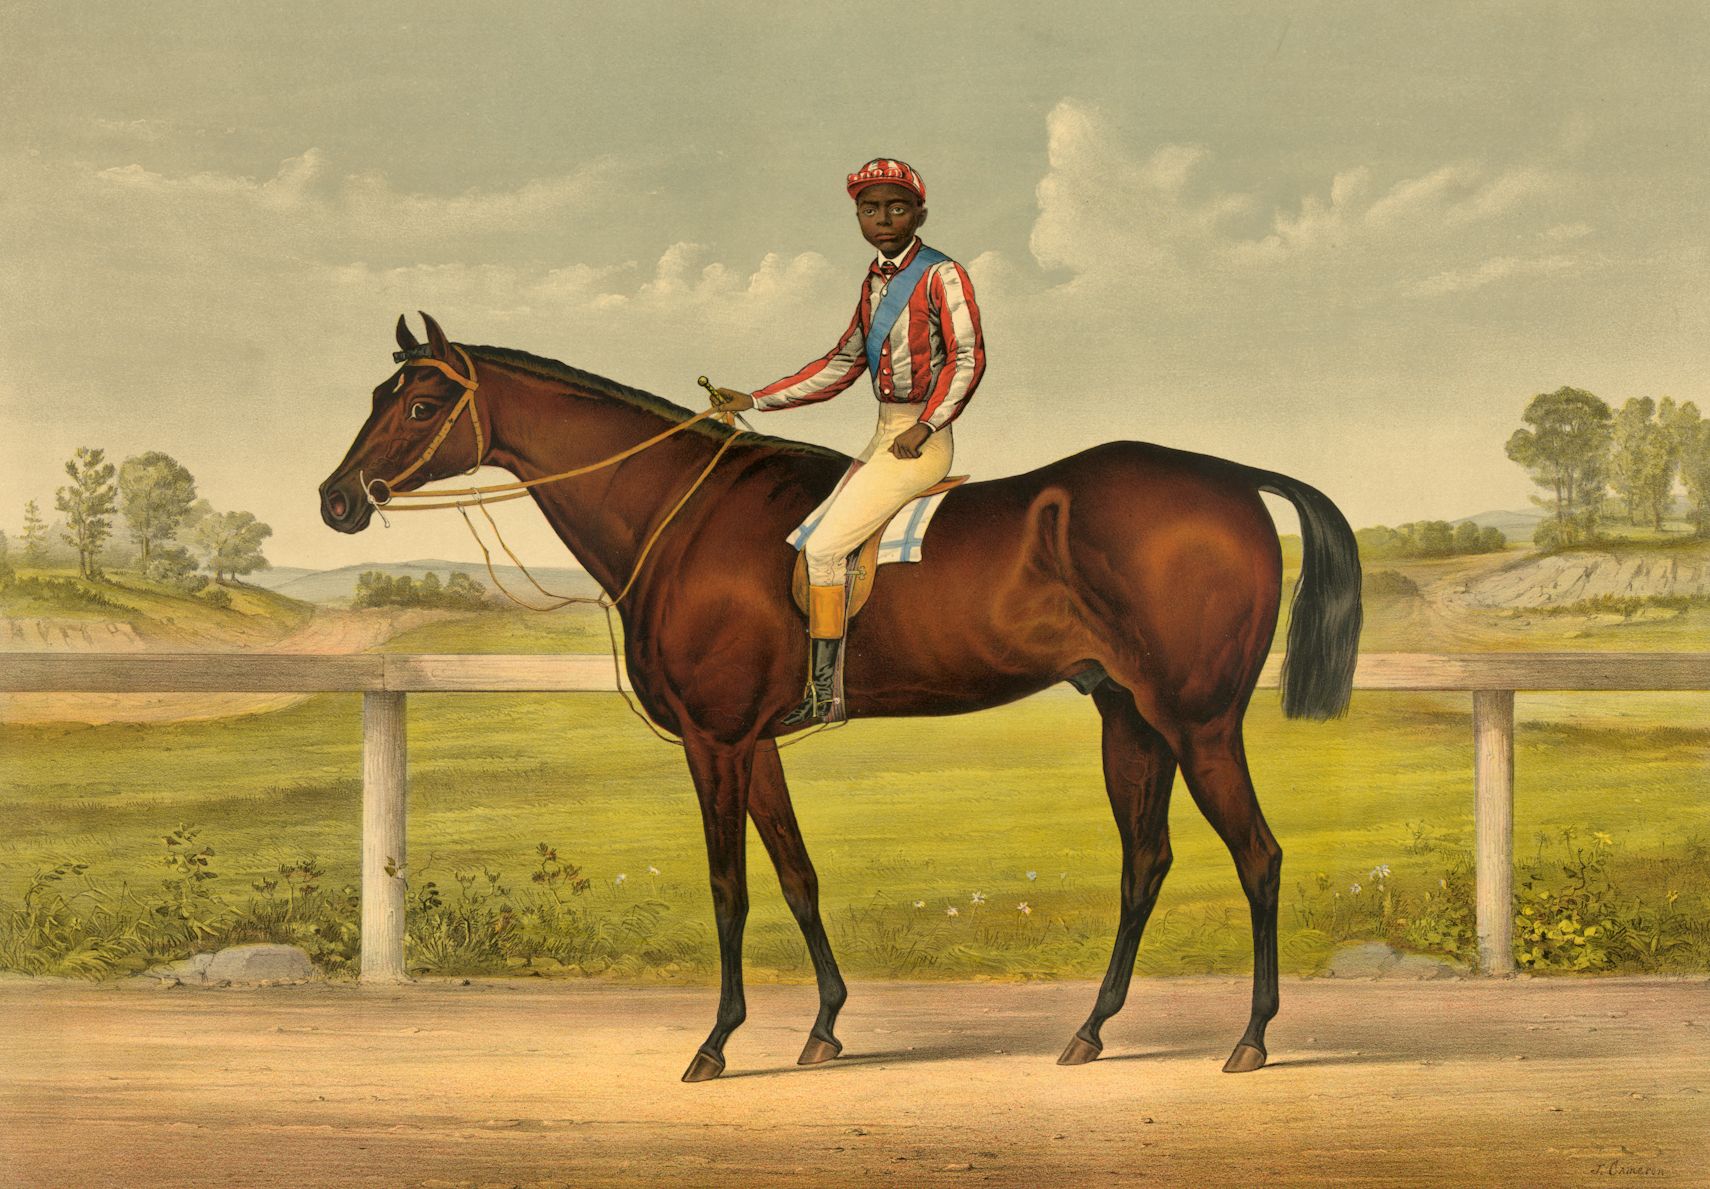 Shelby "Pike" Barnes aboard Tenny (Currier and Ives)